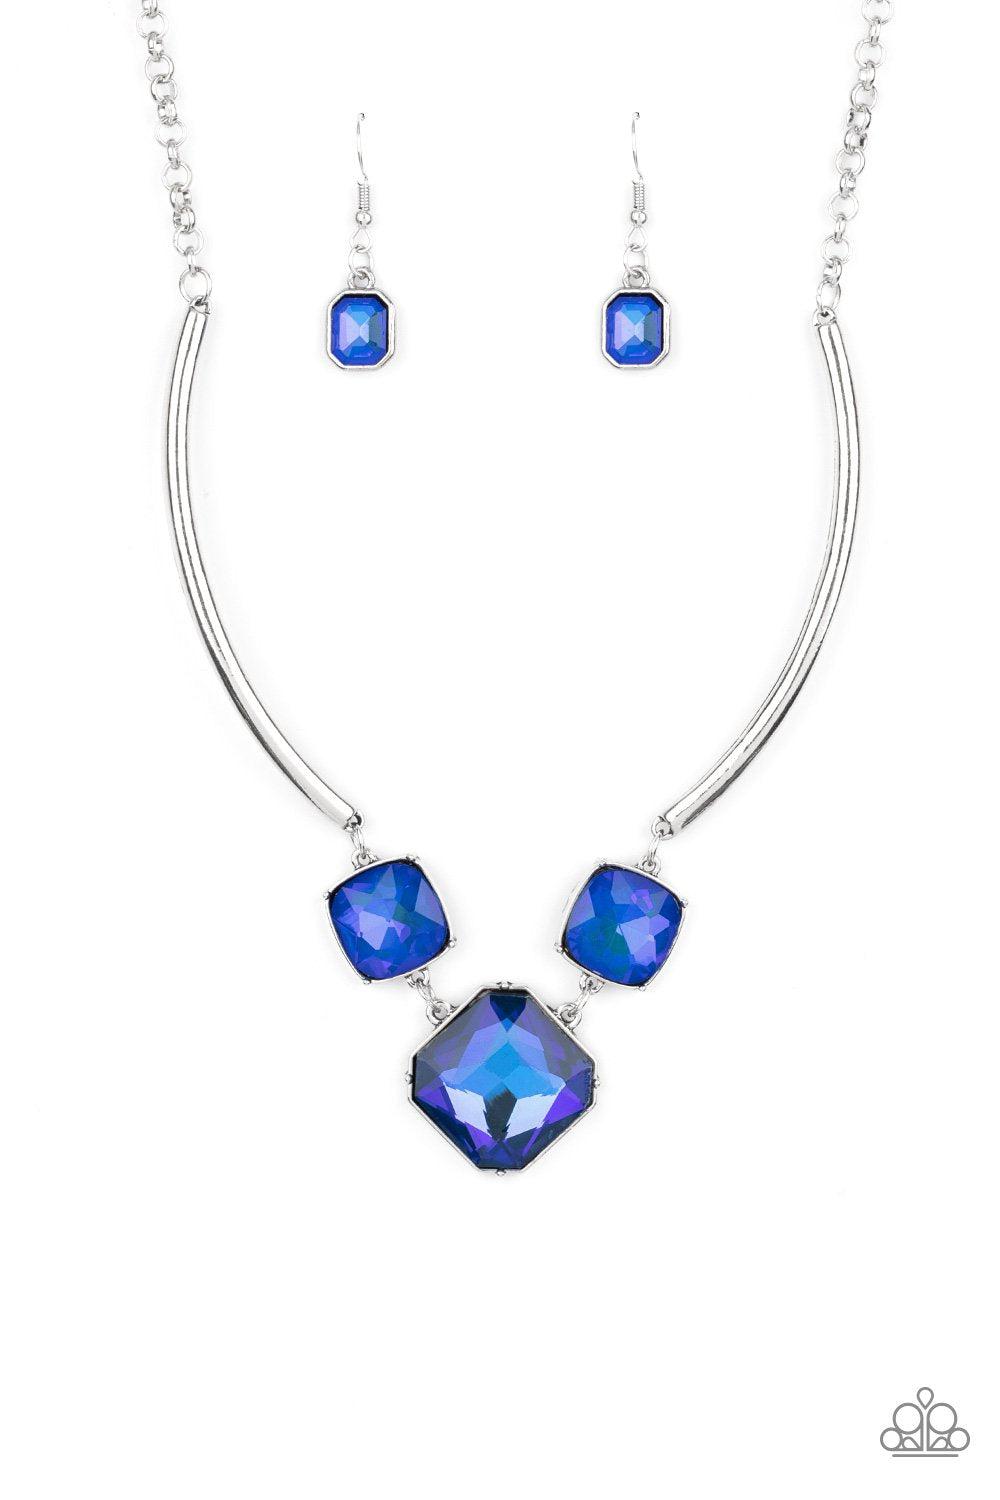 Divine IRIDESCENCE Blue Rhinestone Necklace - Paparazzi Accessories Life of the Party Exclusive October 2021- lightbox - CarasShop.com - $5 Jewelry by Cara Jewels